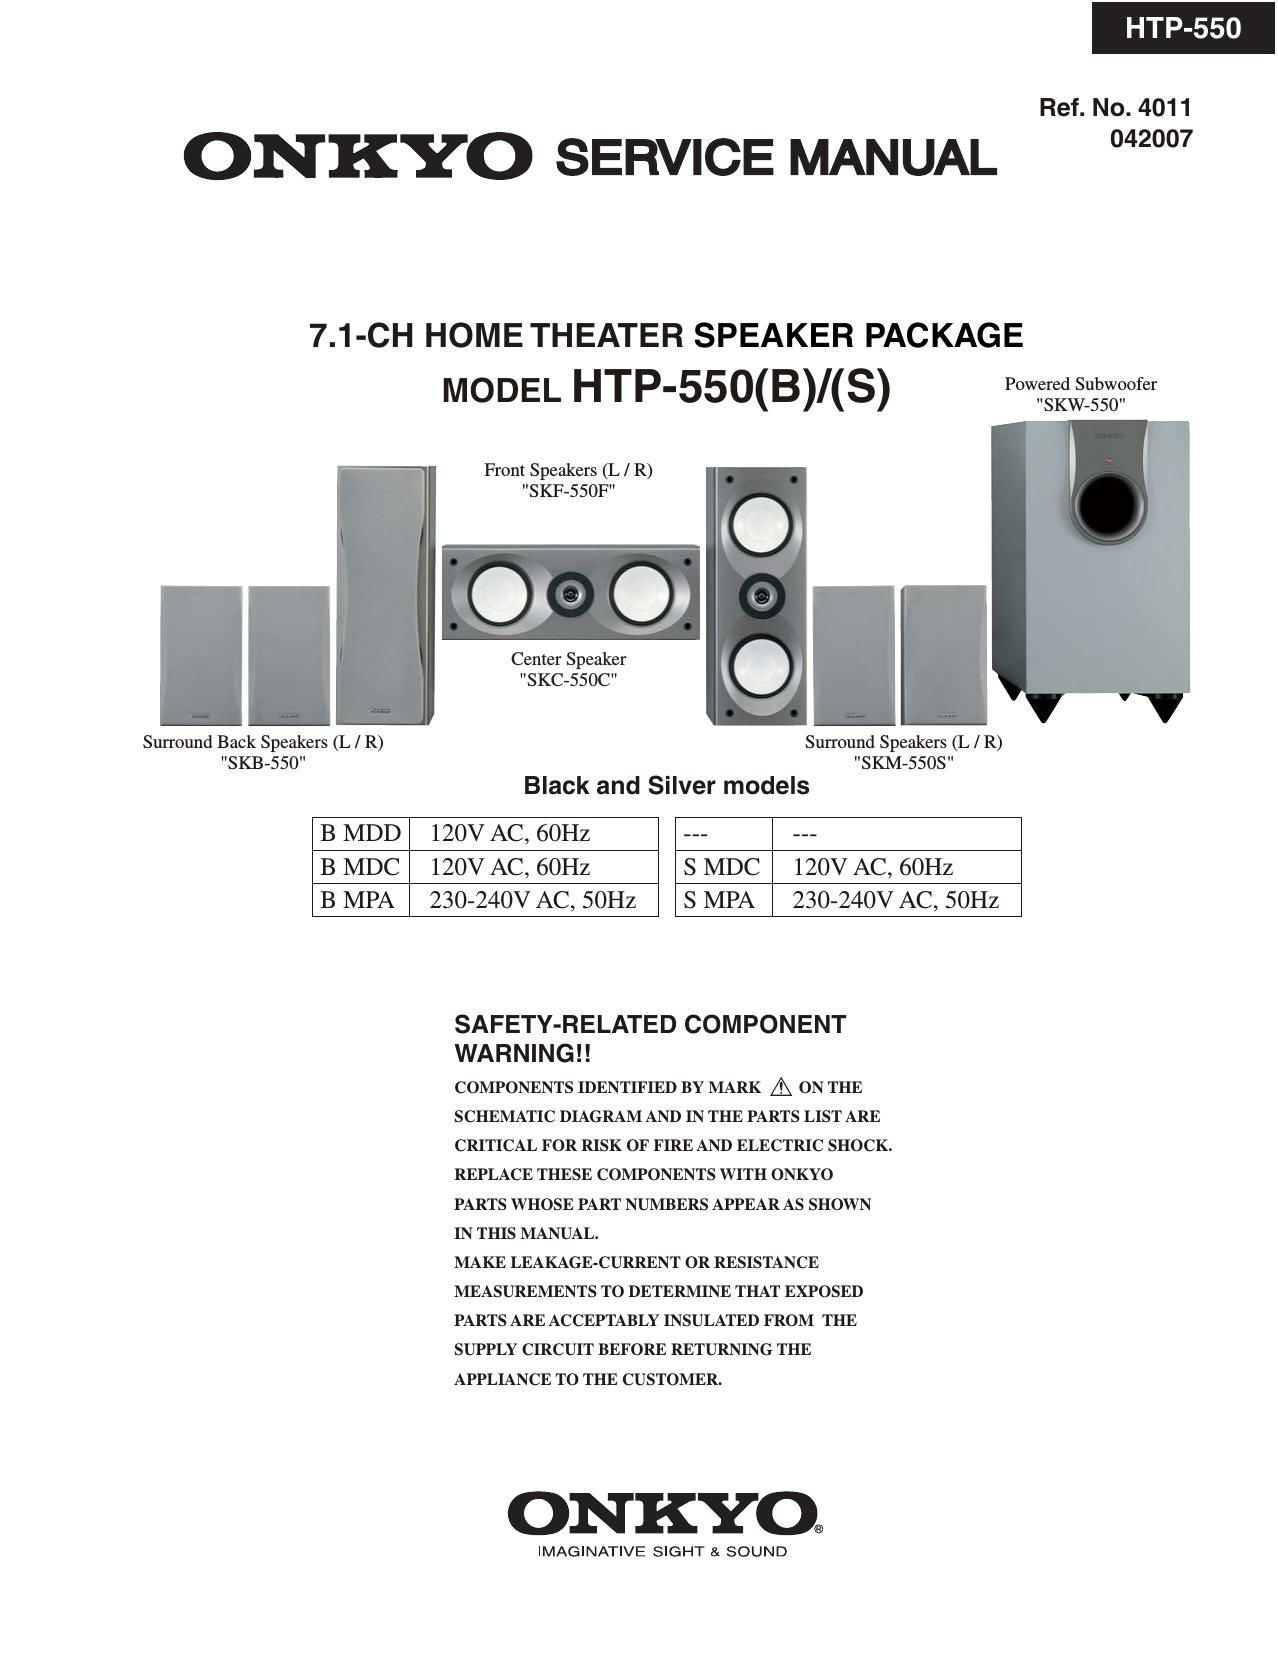 Onkyo SKW 550 Service Manual